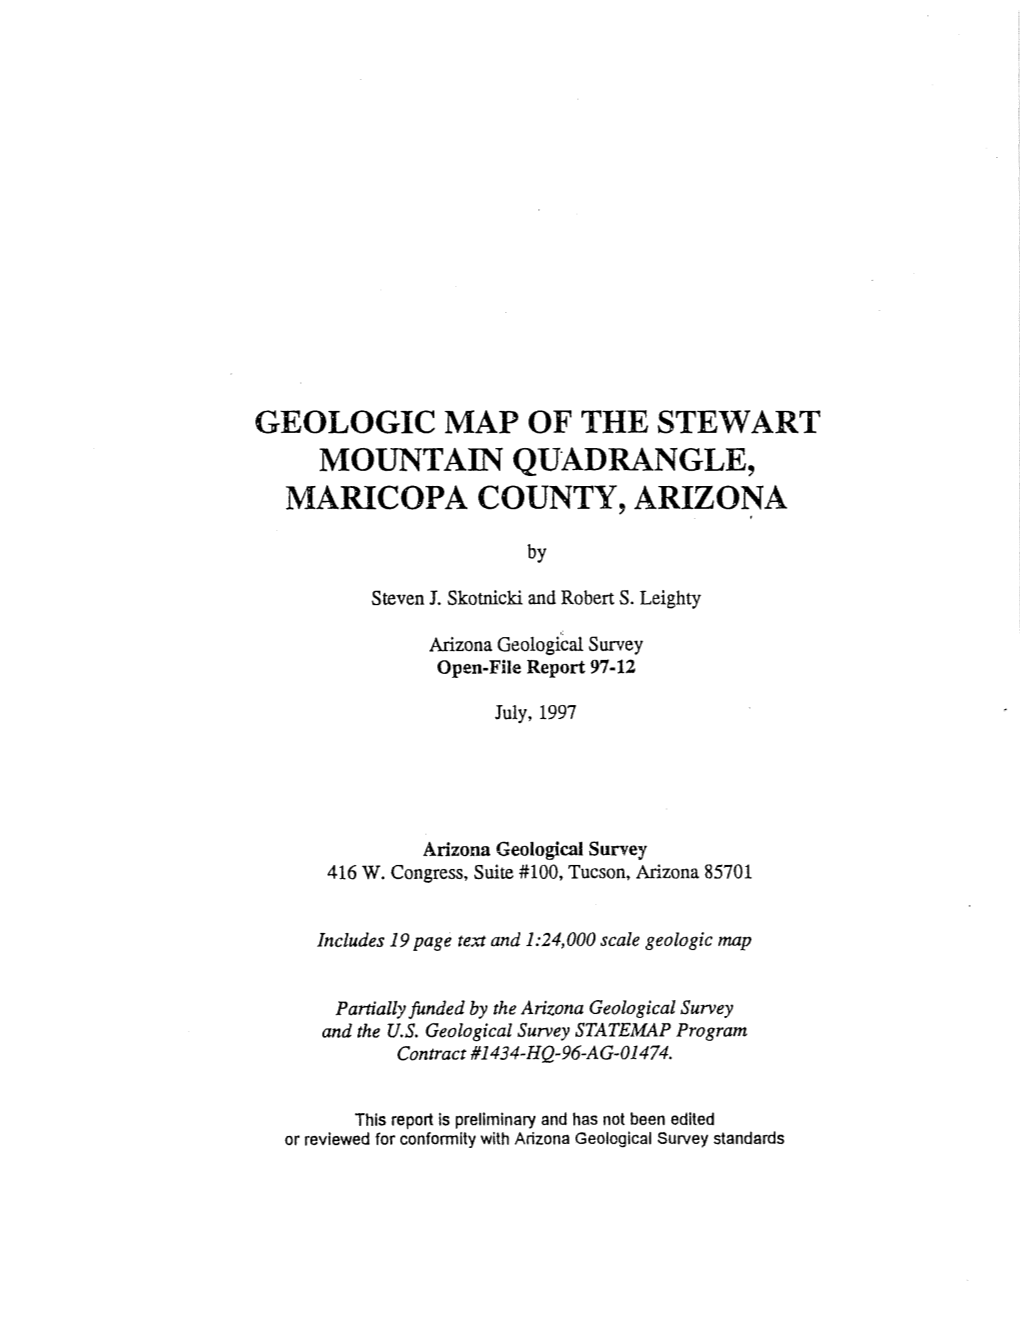 Geologic Report of the Stewart Mountain